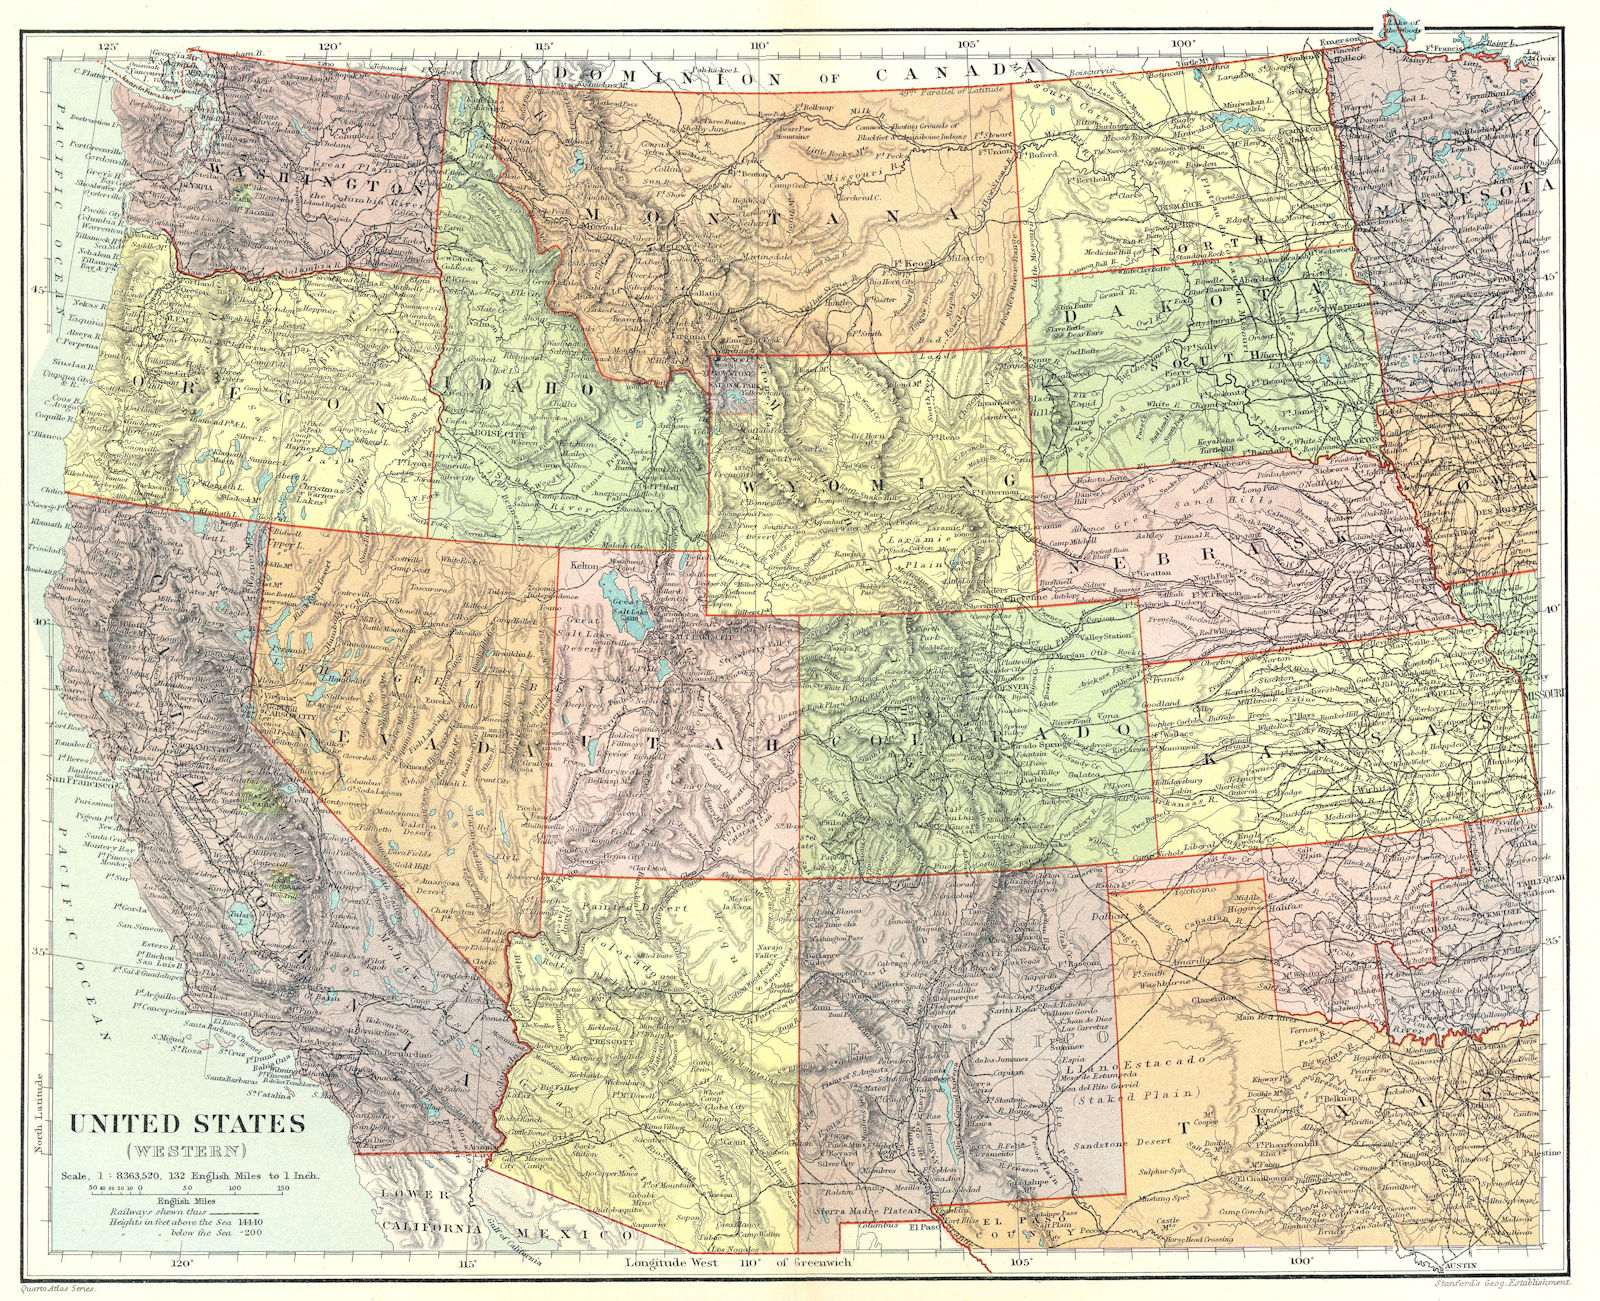 UNITED STATES WEST. Pacific states Mountain States. STANFORD 1906 old map